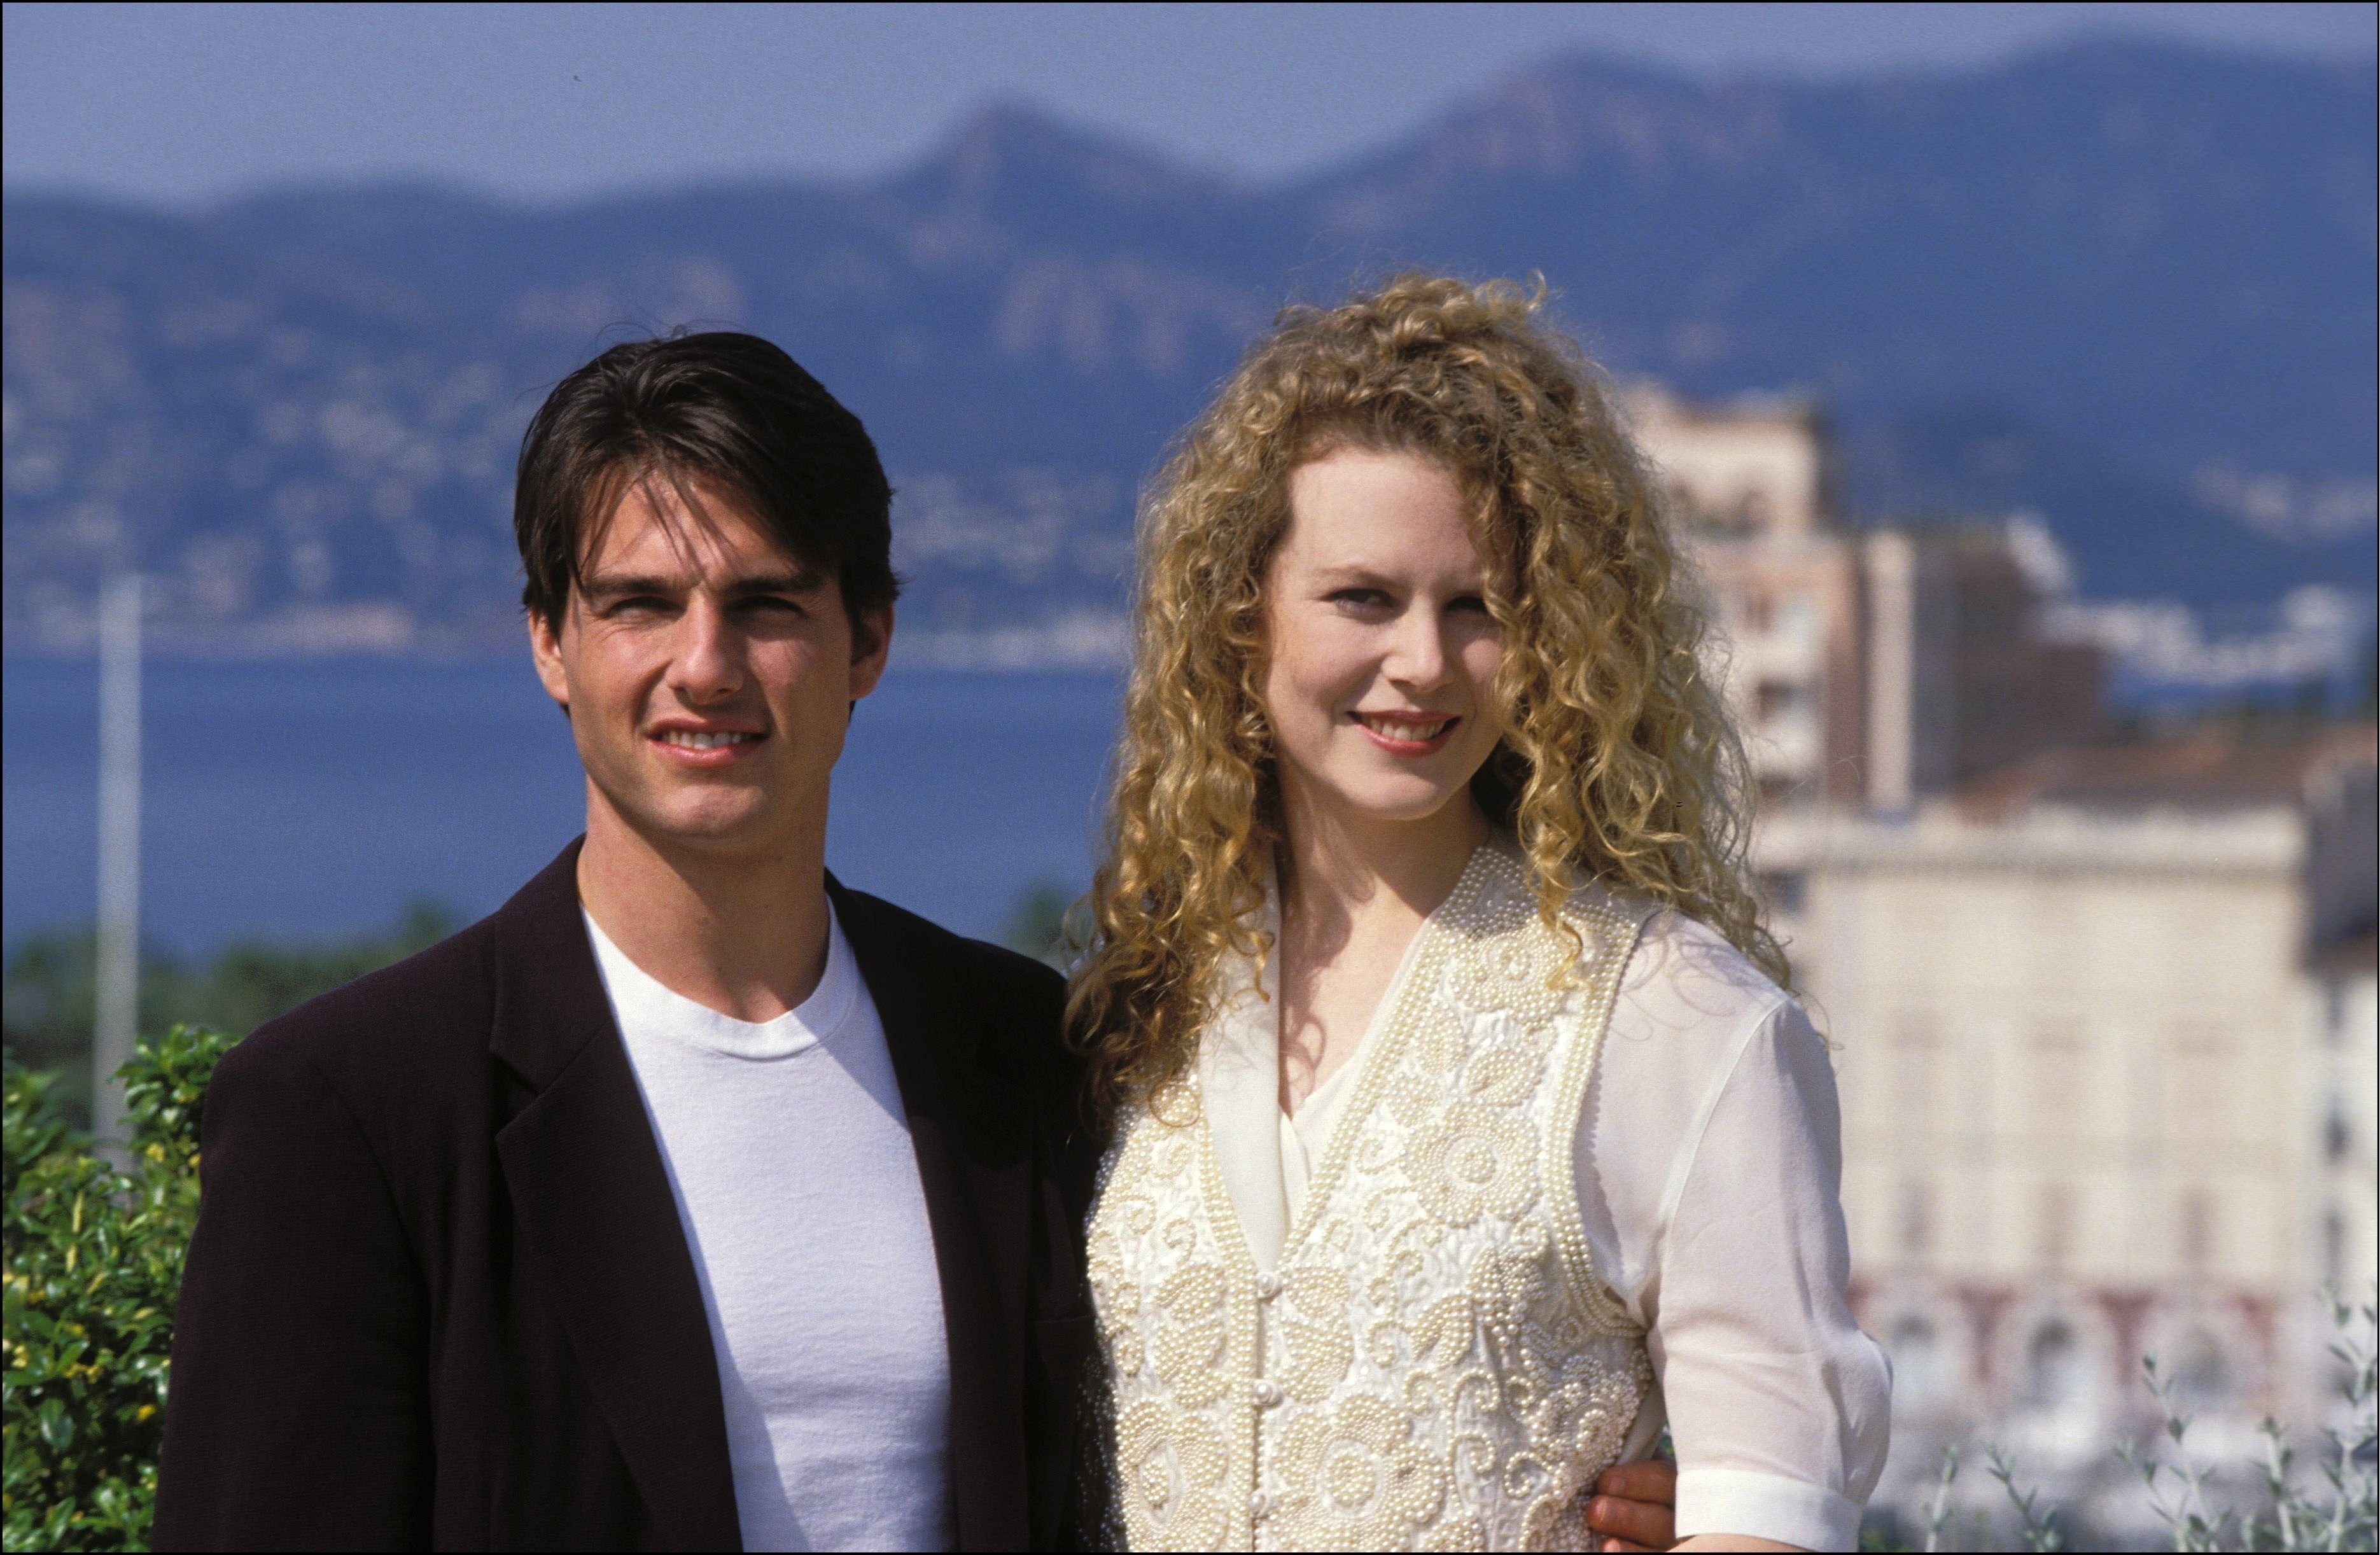 Tom Cruise and Nicole Kidman In Cannes, France, May 17, 1992 | Source: Getty Images